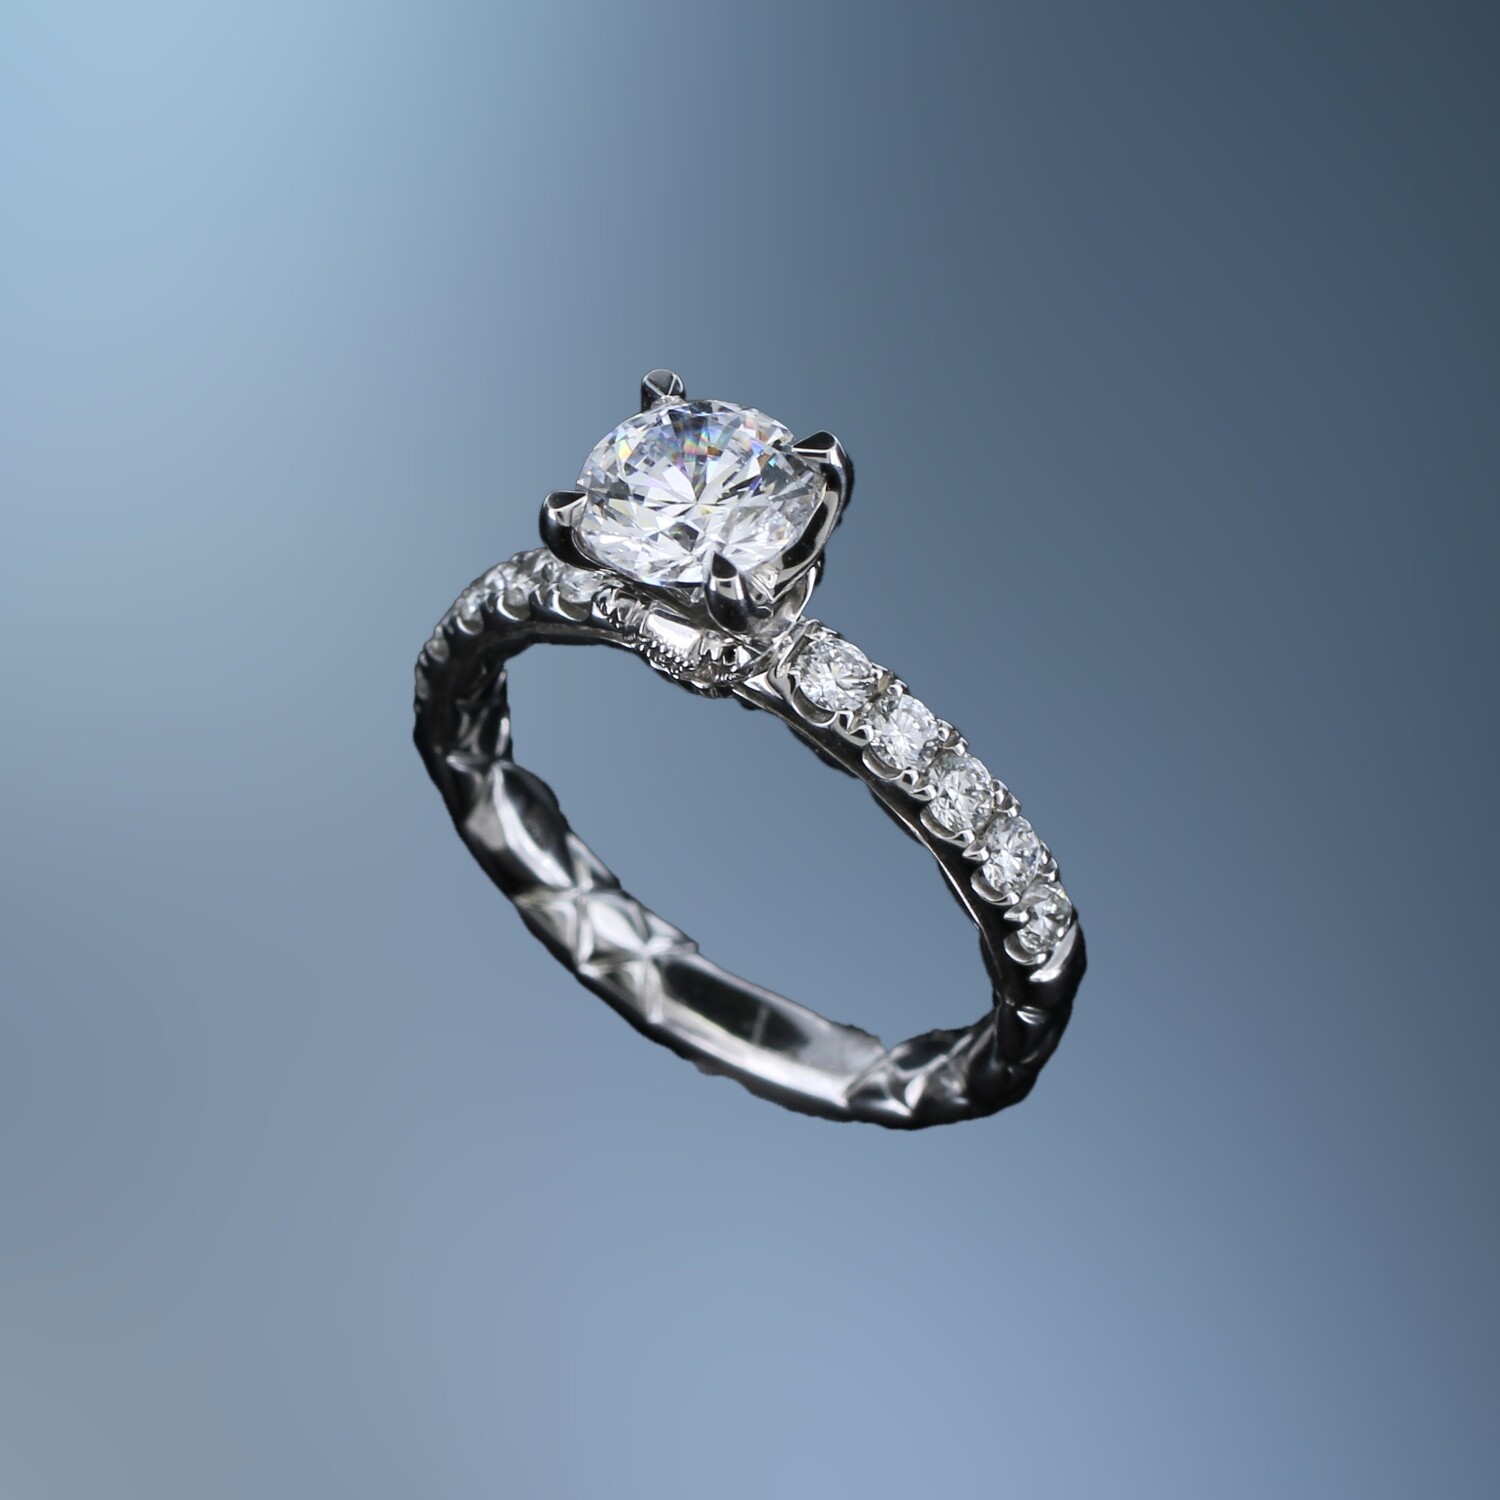 A. JAFFE 14KT WHITE GOLD ENGAGEMENT RING FEATURING 12 ROUND BRILLIANT CUT DIAMONDS TOTALING 0.46 CTS